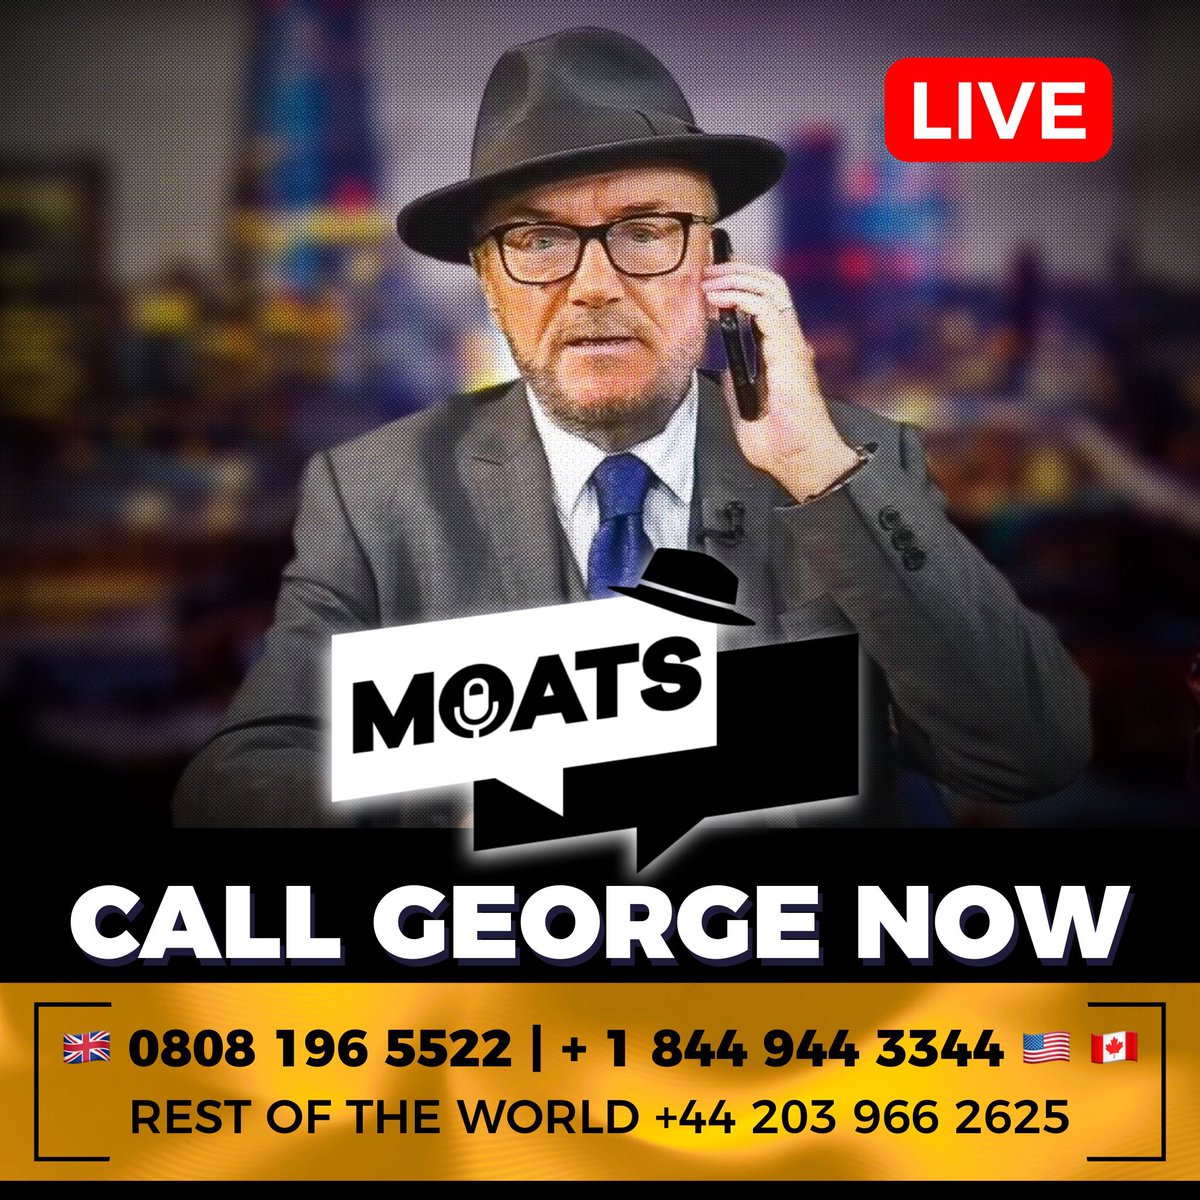 🚨🚨#LIVE The Mother Of All Talk Shows is ON AIR now! Call #MOATS TOLL FREE worldwide! 🇬🇧 🇮🇪 0808 196 5522 🇺🇸 🇨🇦 +1 844 944 3344 🌎 +44 203 966 2625 🟥 youtube.com/live/YdflXR3BW… 🟩 rumble.com/v4p43f3-moats-…